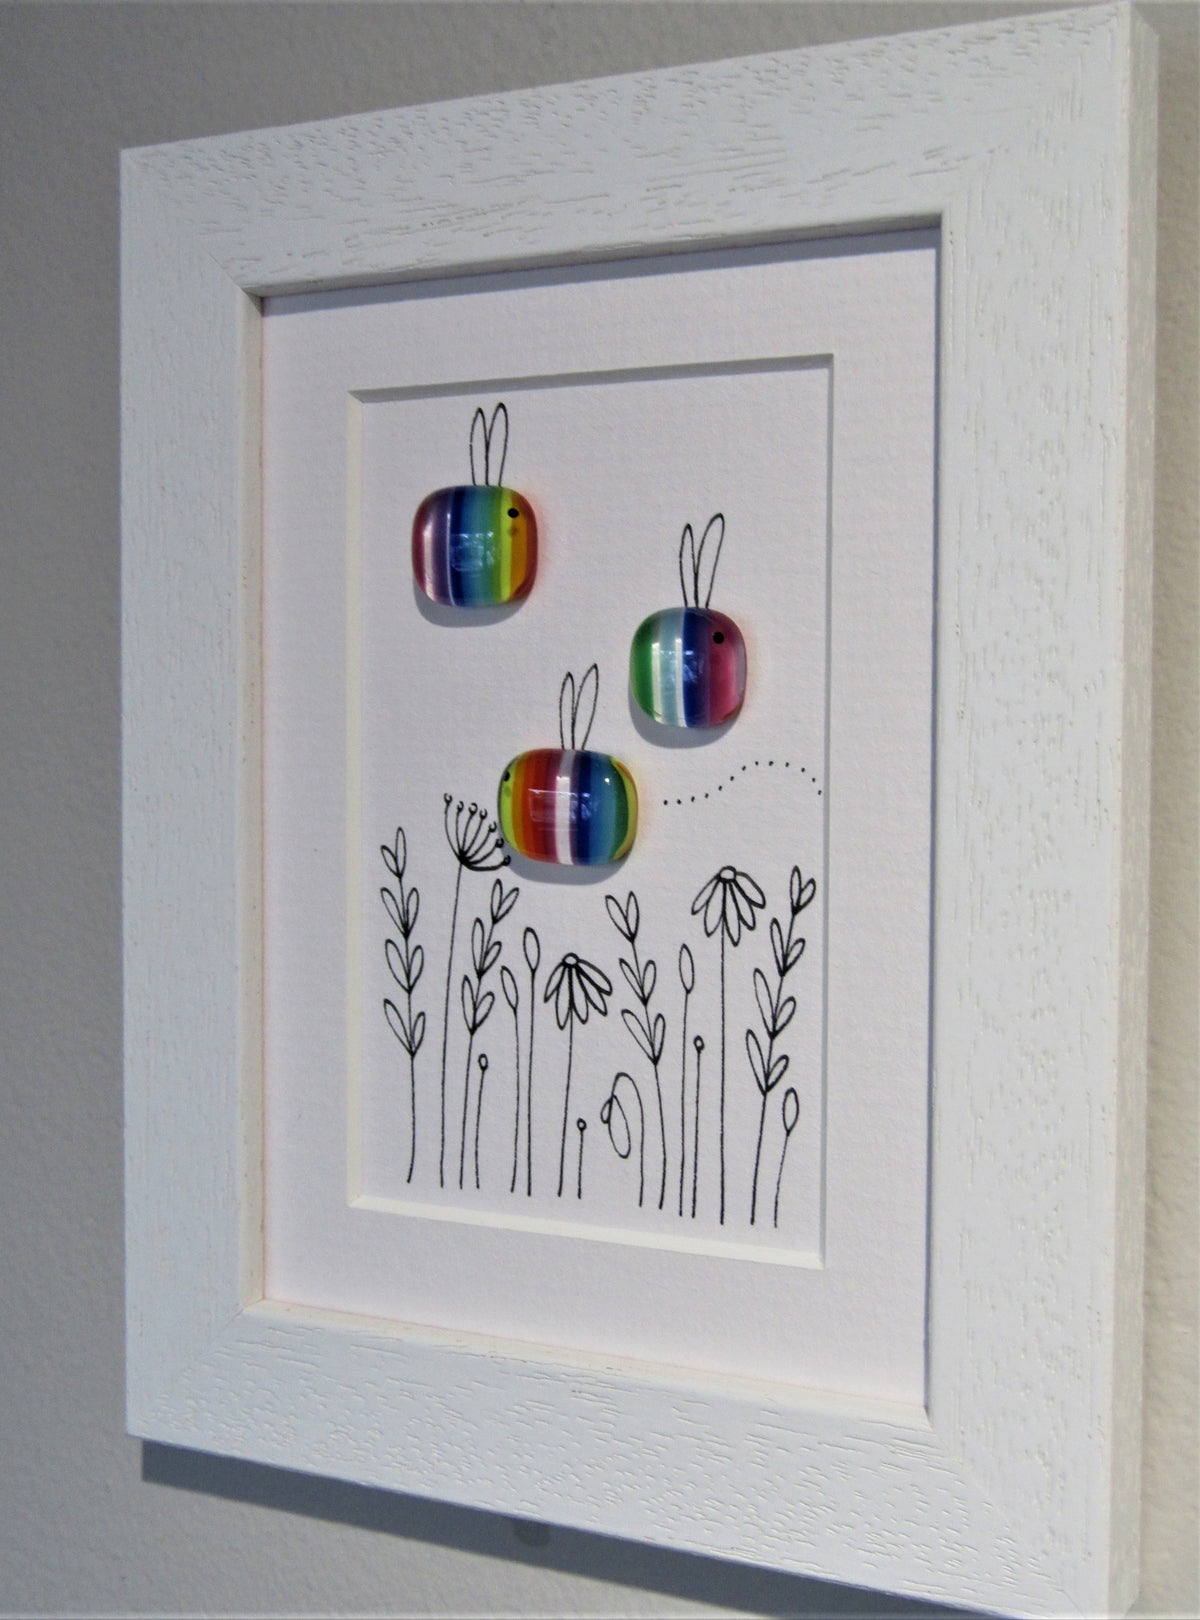 Image and Fused Glass by Niko Brown